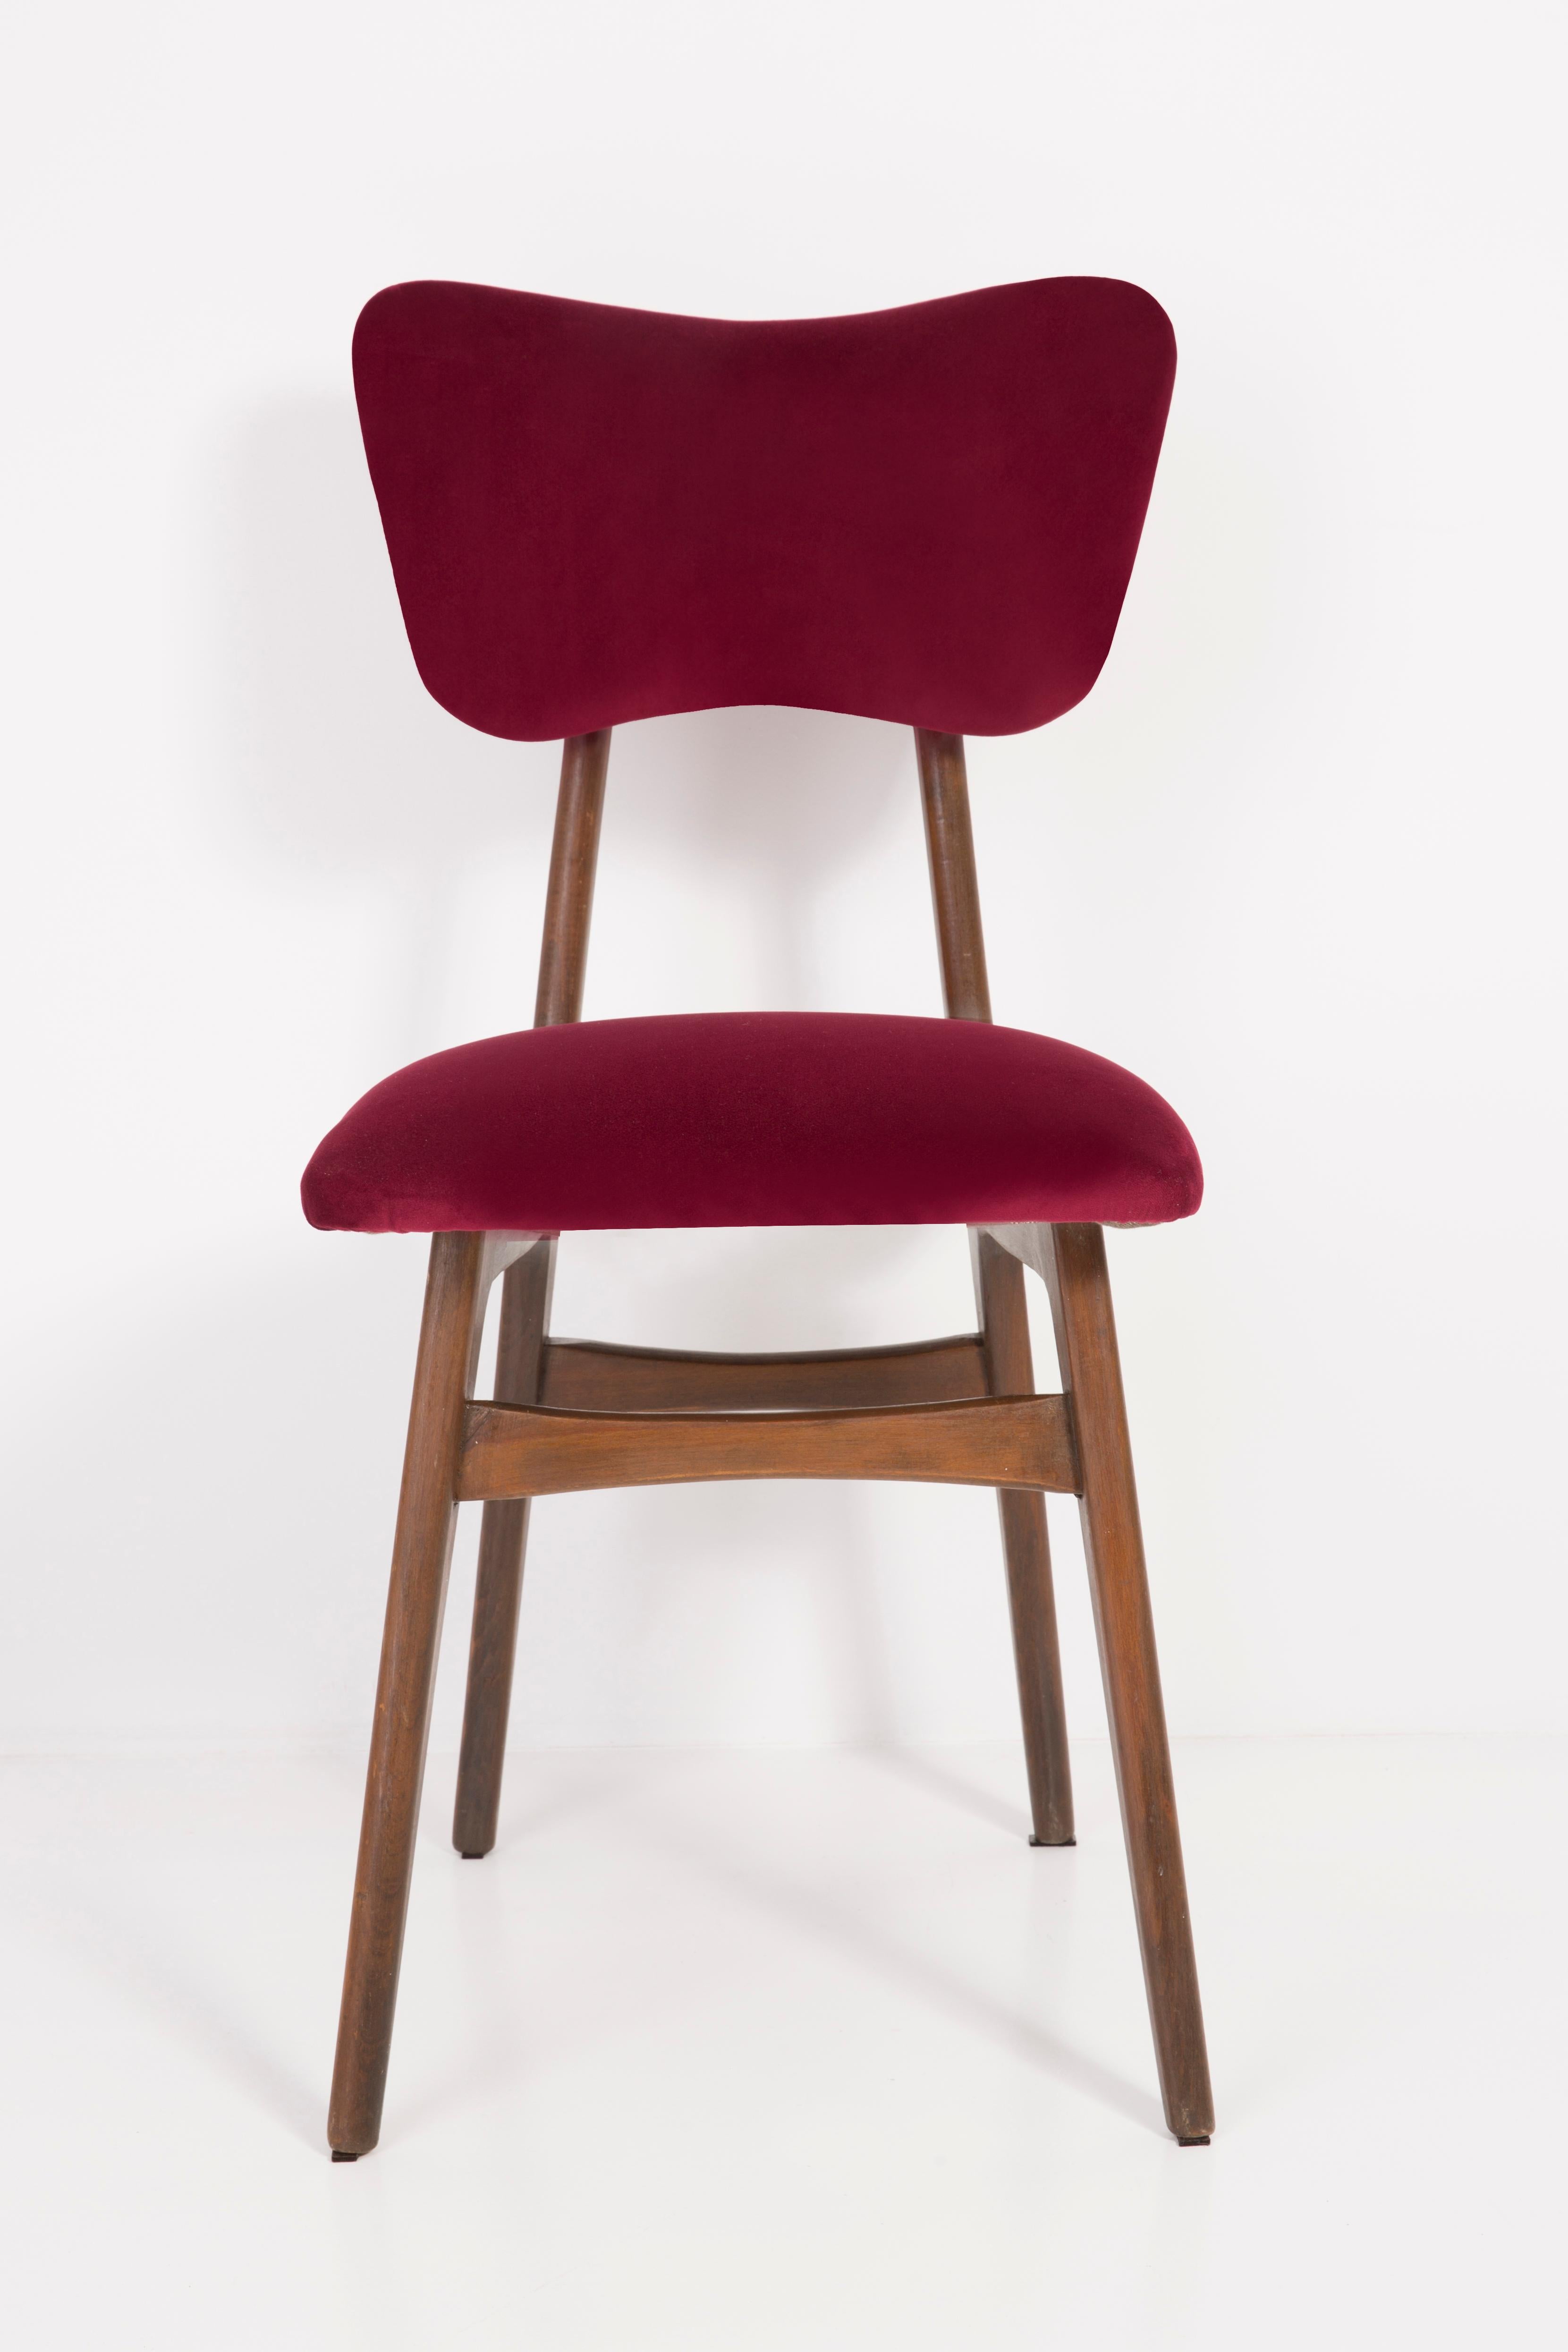 Chair designed by Prof. Rajmund Halas. Made of beechwood. Chair is after a complete upholstery renovation, the woodwork has been refreshed. Seat and back is dressed in burgundy red, durable and pleasant to touch velvet fabric. Chair is stabile and